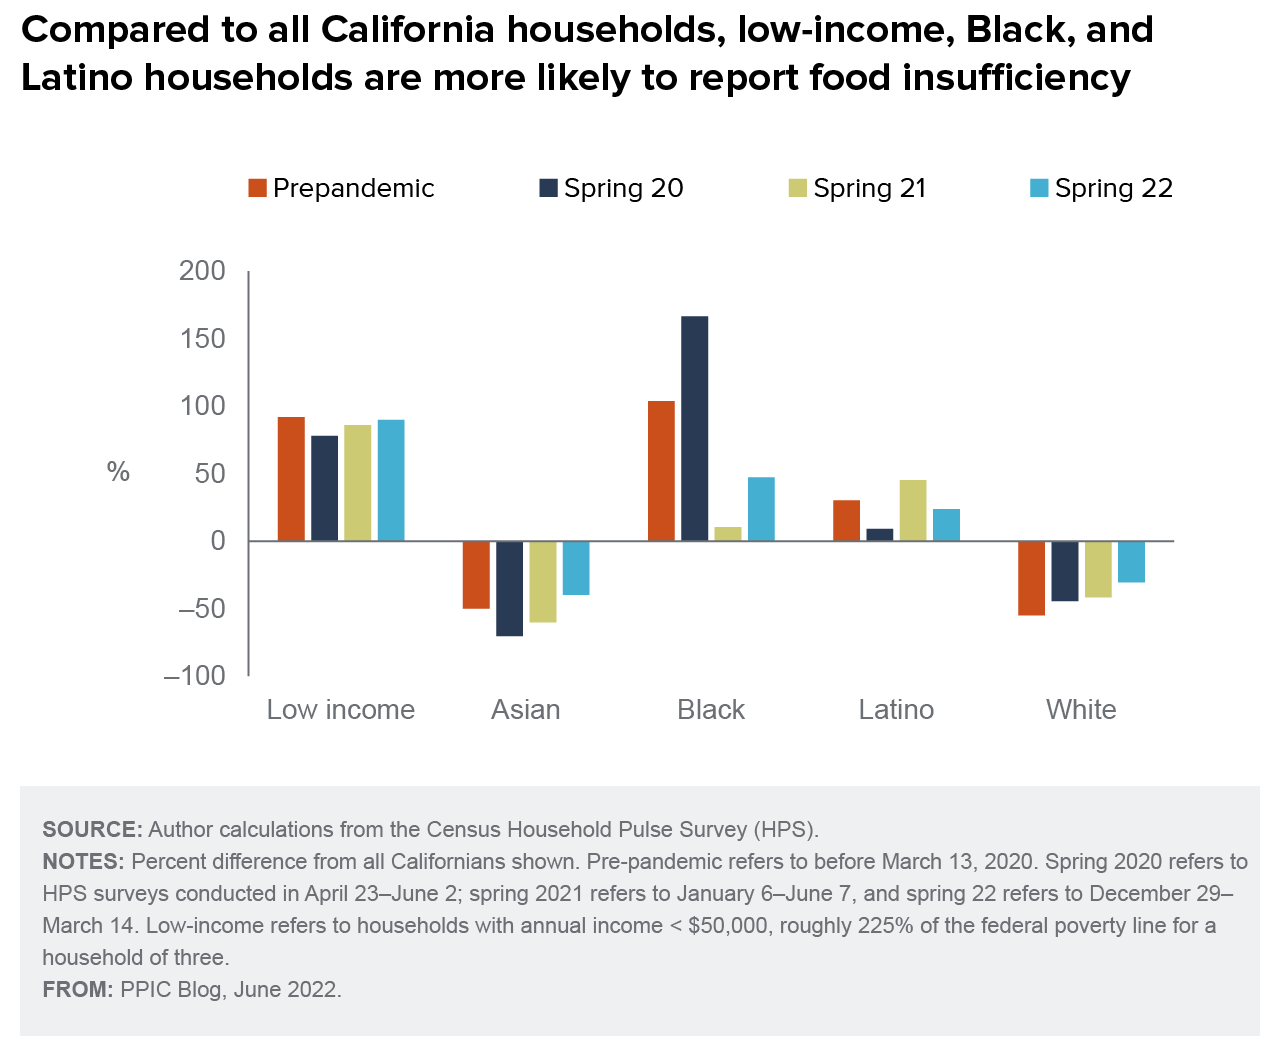 figure - Compared to all California households, low-income, Black, and Latino households are more likely to report food insufficiency